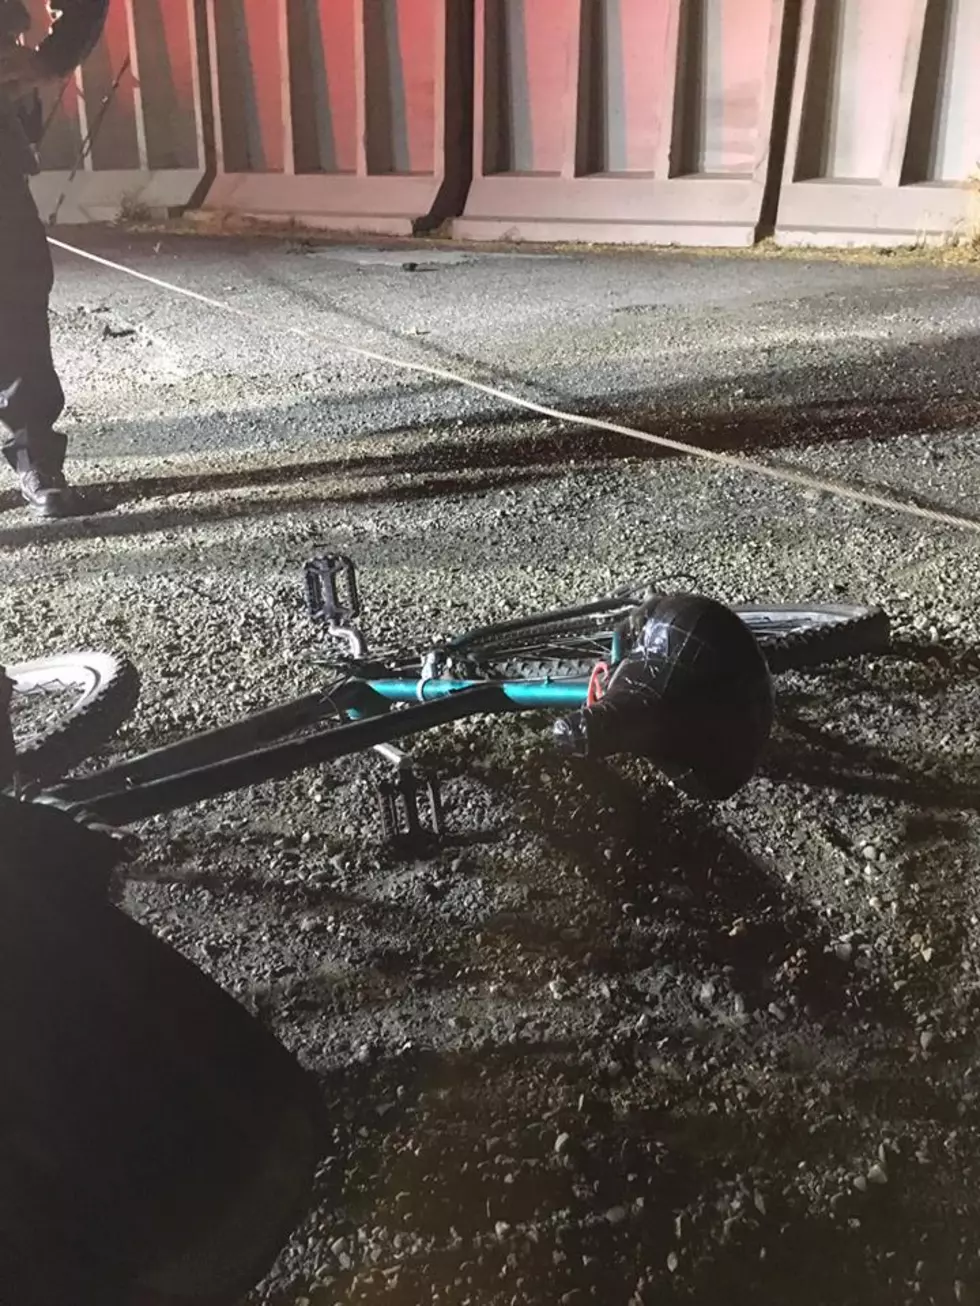 Rider In Dark ‘Sliced’ Off Bike by Elevated Steel Cable